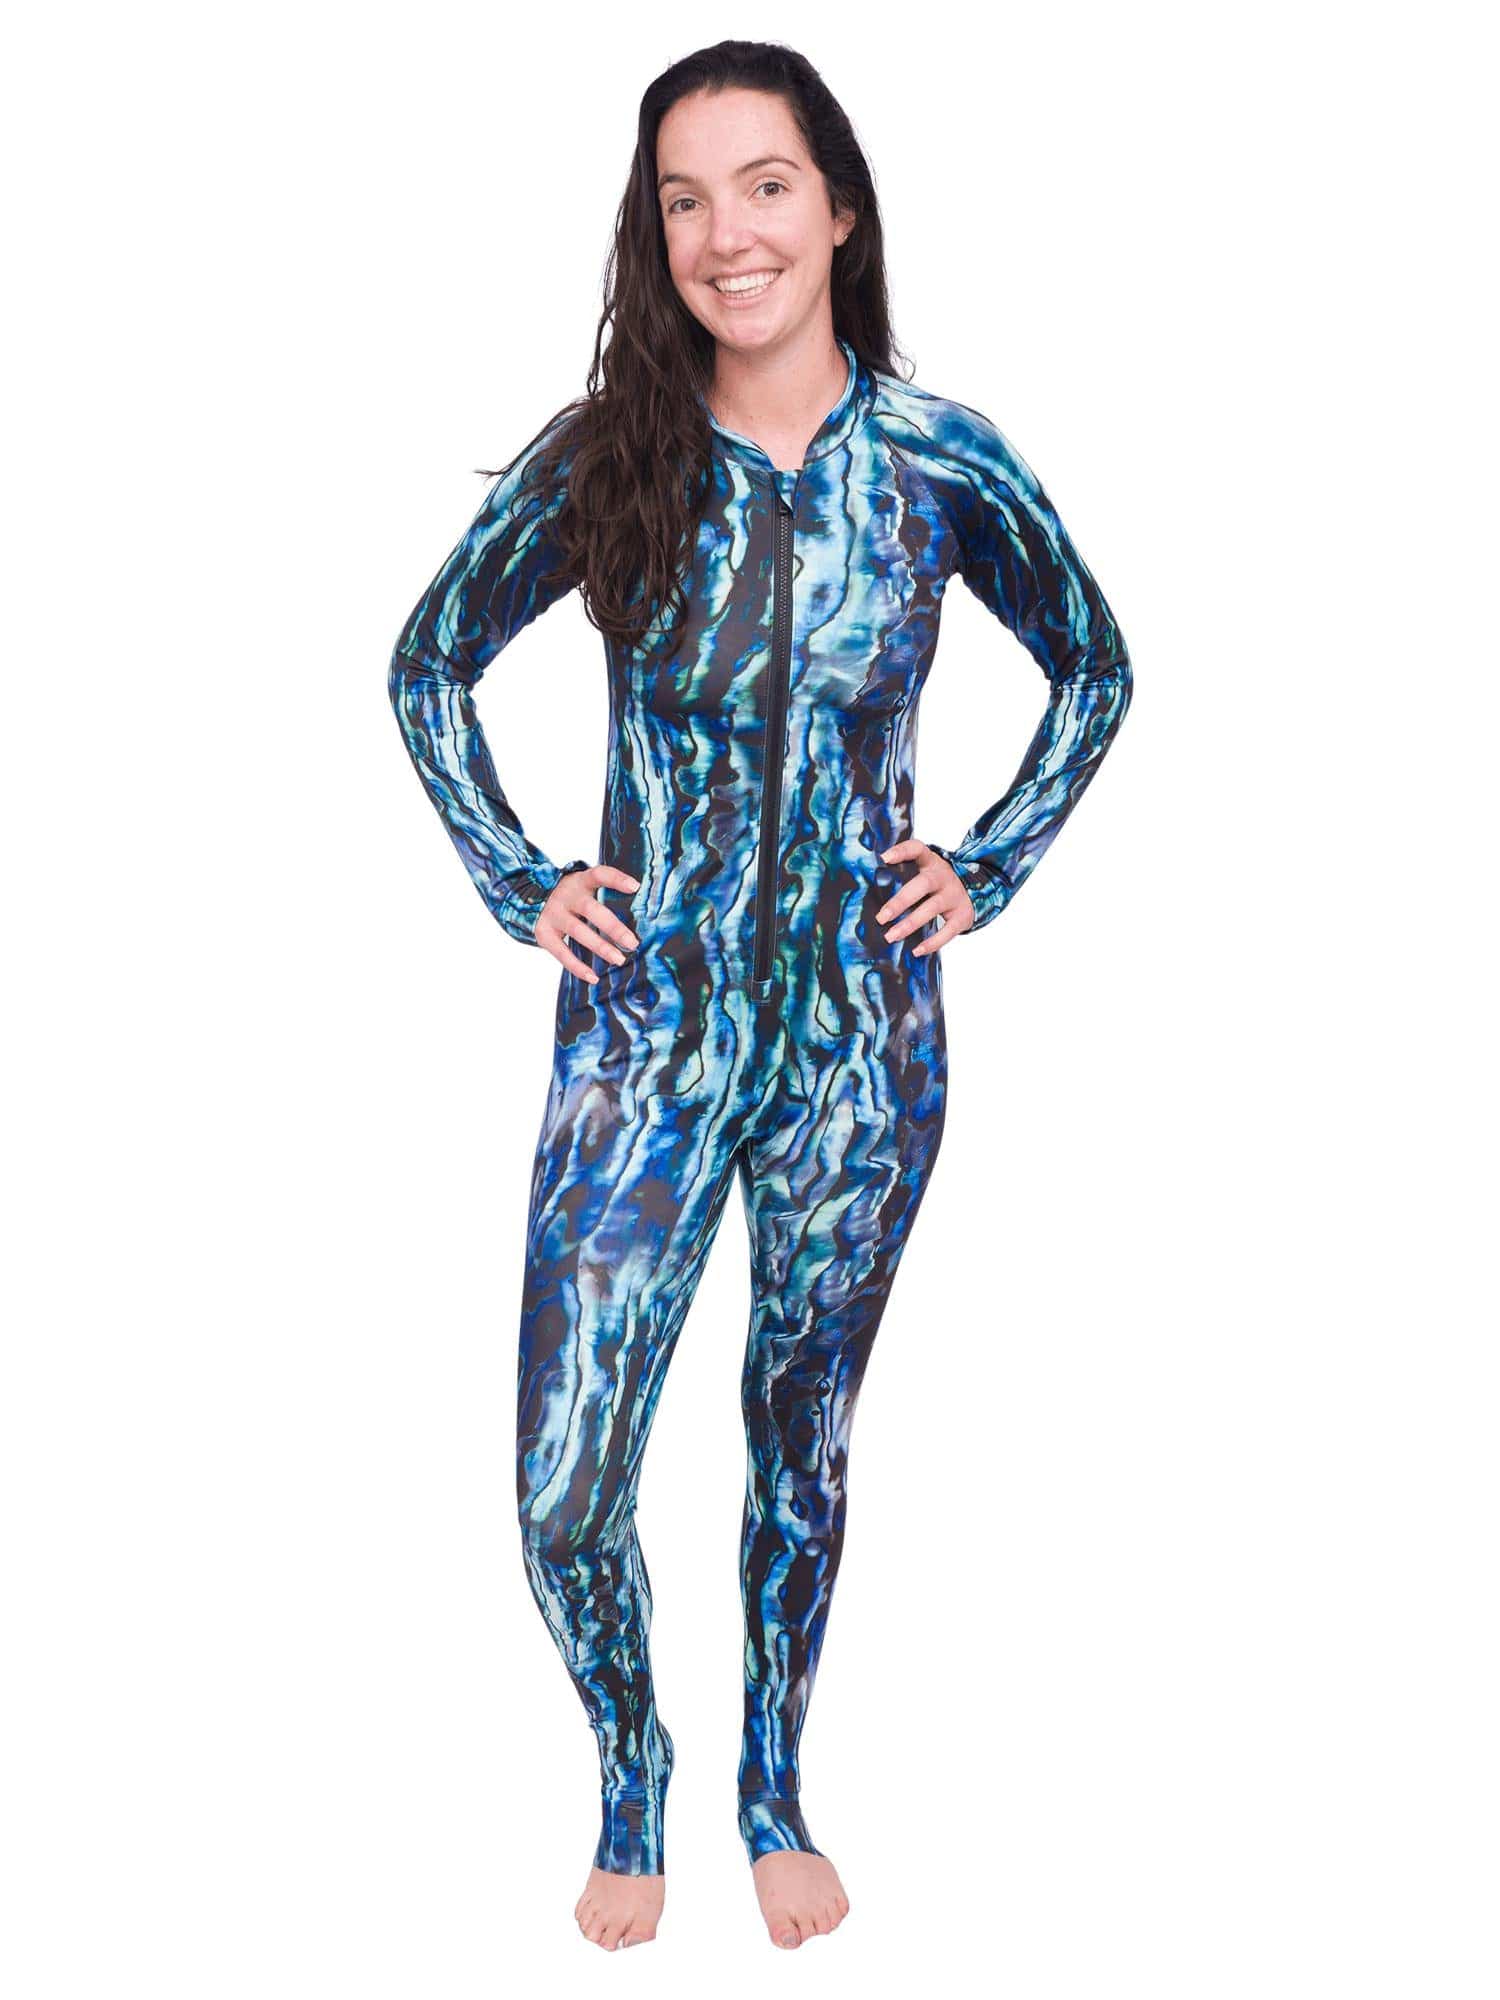 Model: Maddie is the Program & Outreach Director at Debris Free Oceans and a restoration ecology educator. She is 5'8", 135lbs, and wearing a size M.